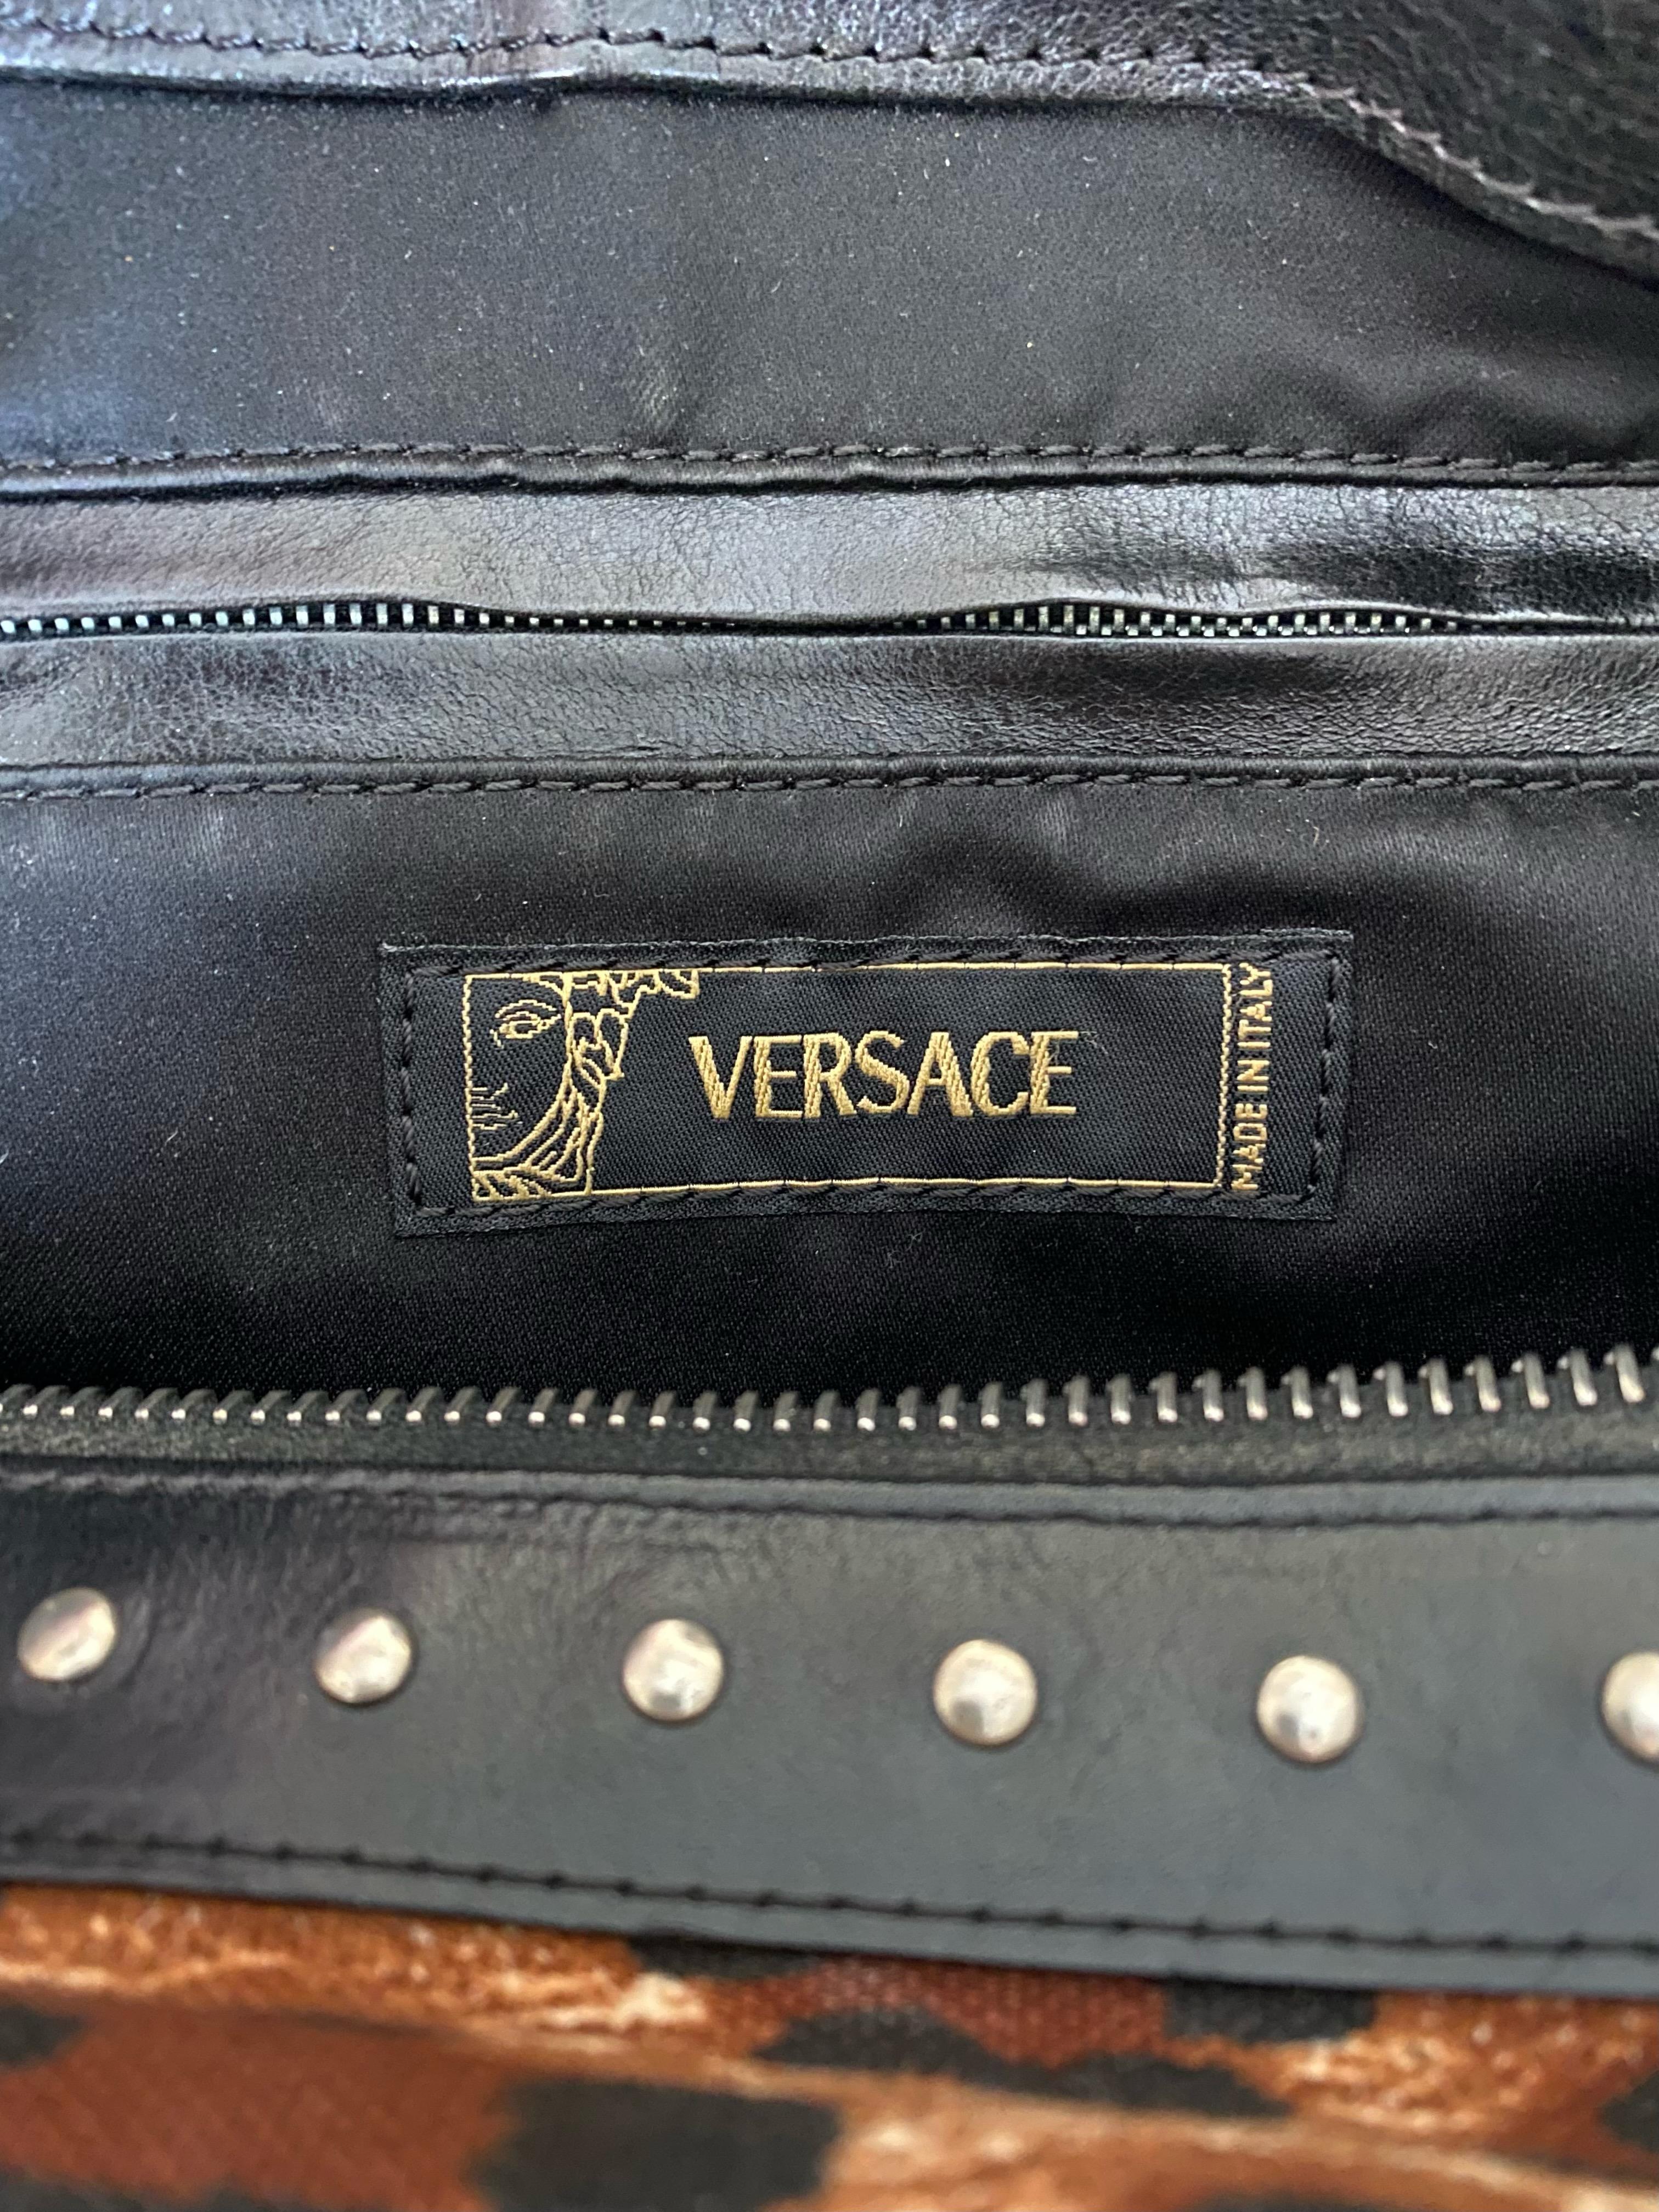 S/S 2005 Versace Chaos Couture Studded Archival Print Boston Bag Runway In Good Condition For Sale In West Hollywood, CA